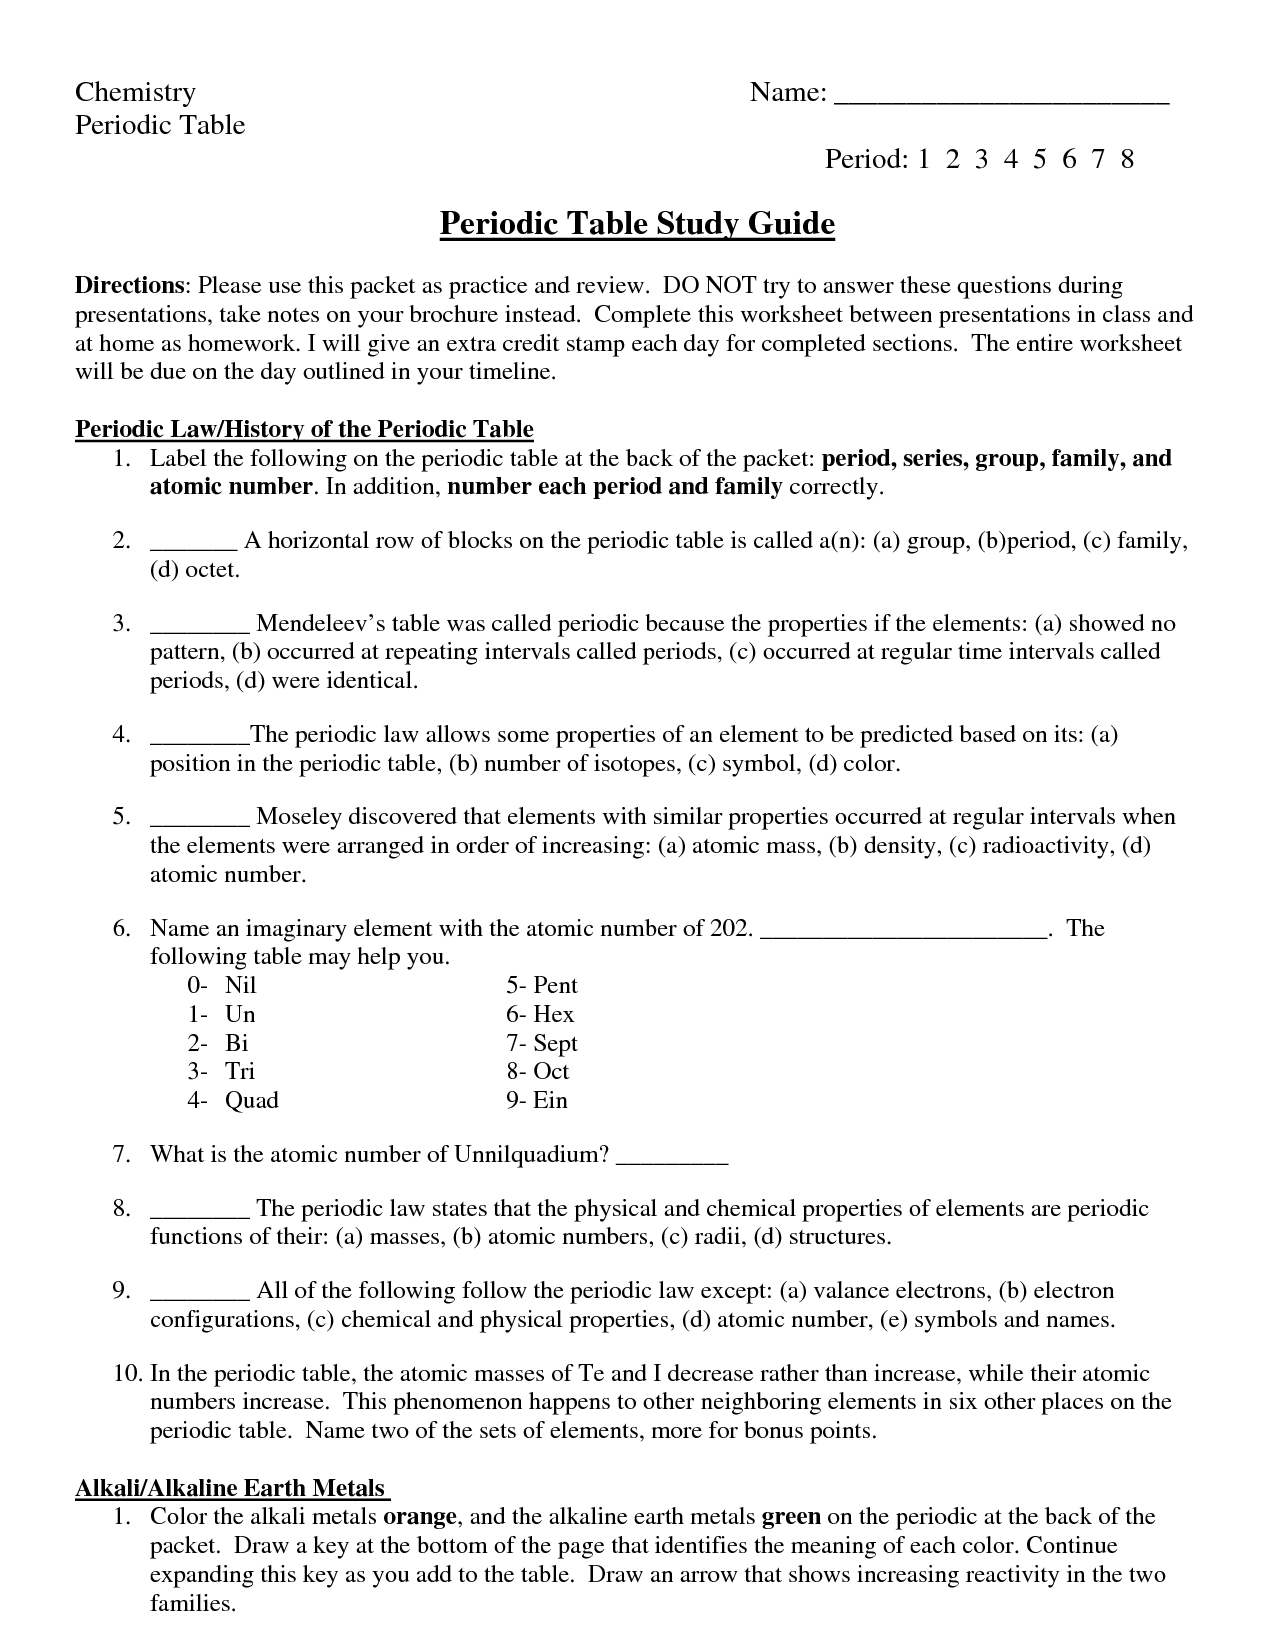 11-best-images-of-periodic-trends-worksheet-with-answers-periodic-trends-worksheet-answers